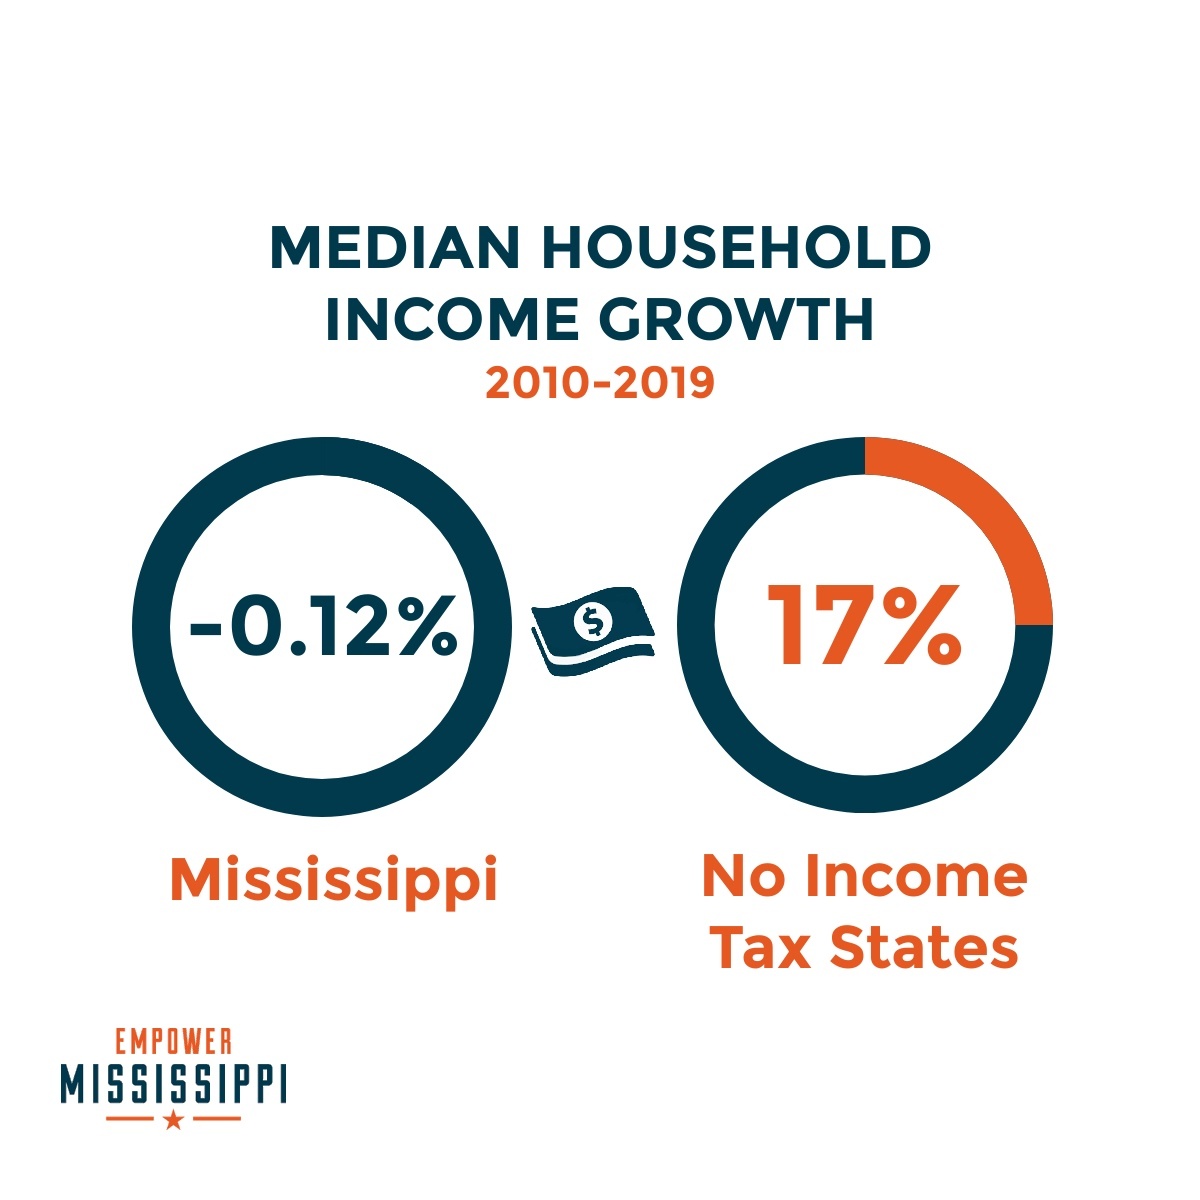 tax free states greatly outpace Mississippi across several key